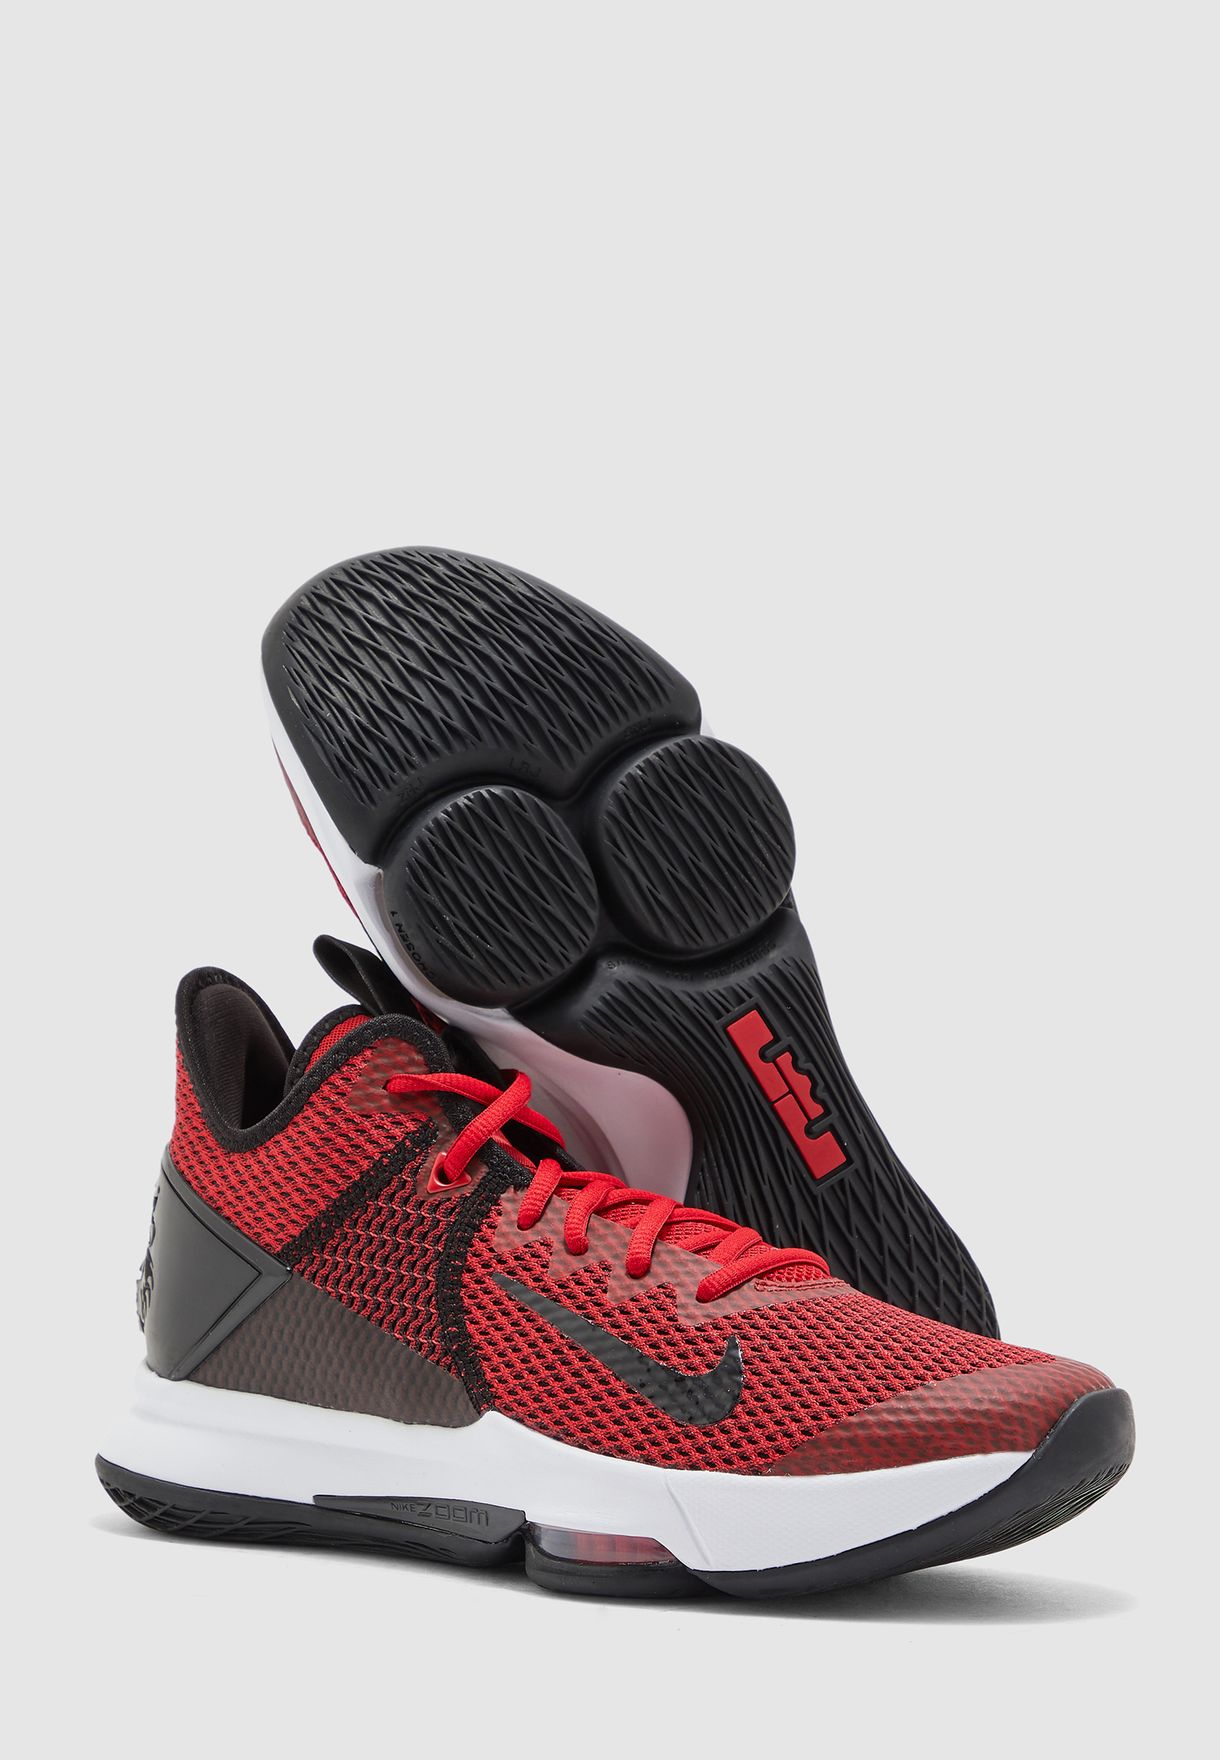 lebron witness 4 black and red